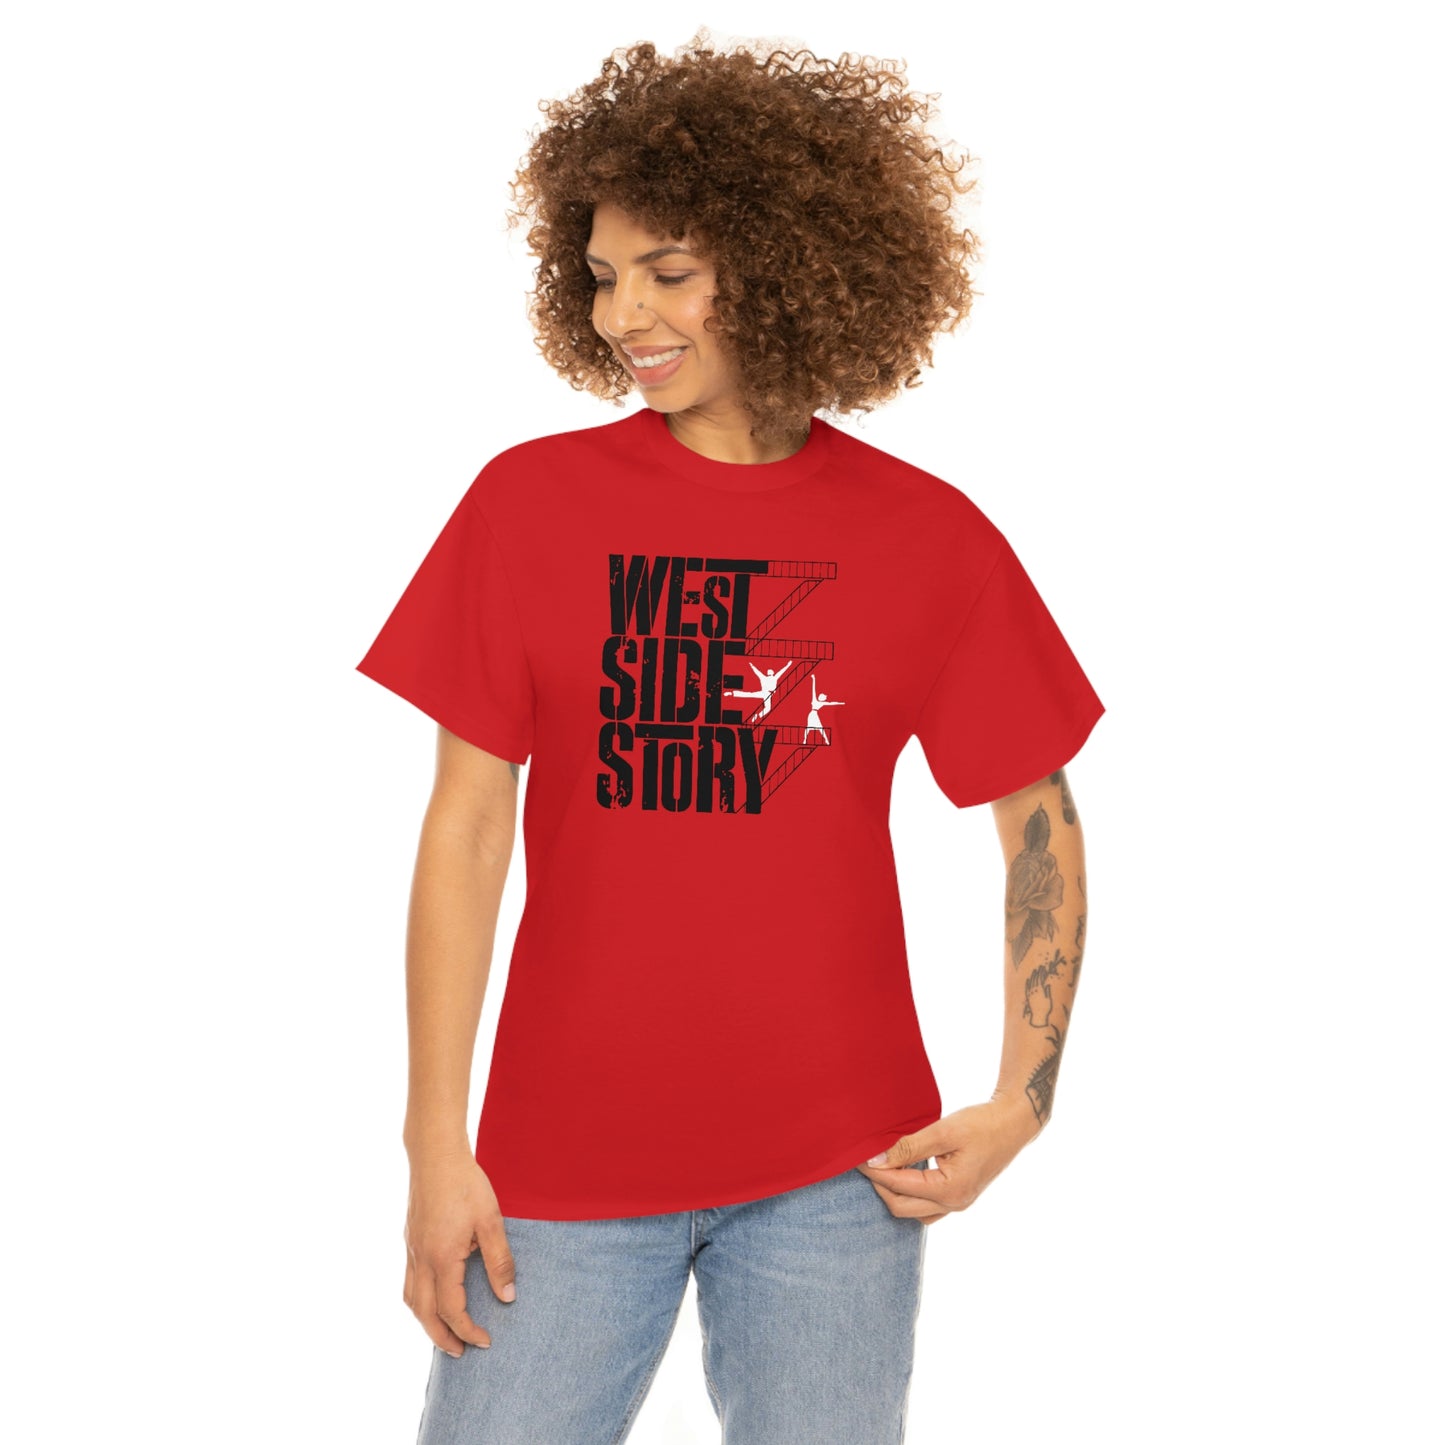 West Side Story T-Shirt